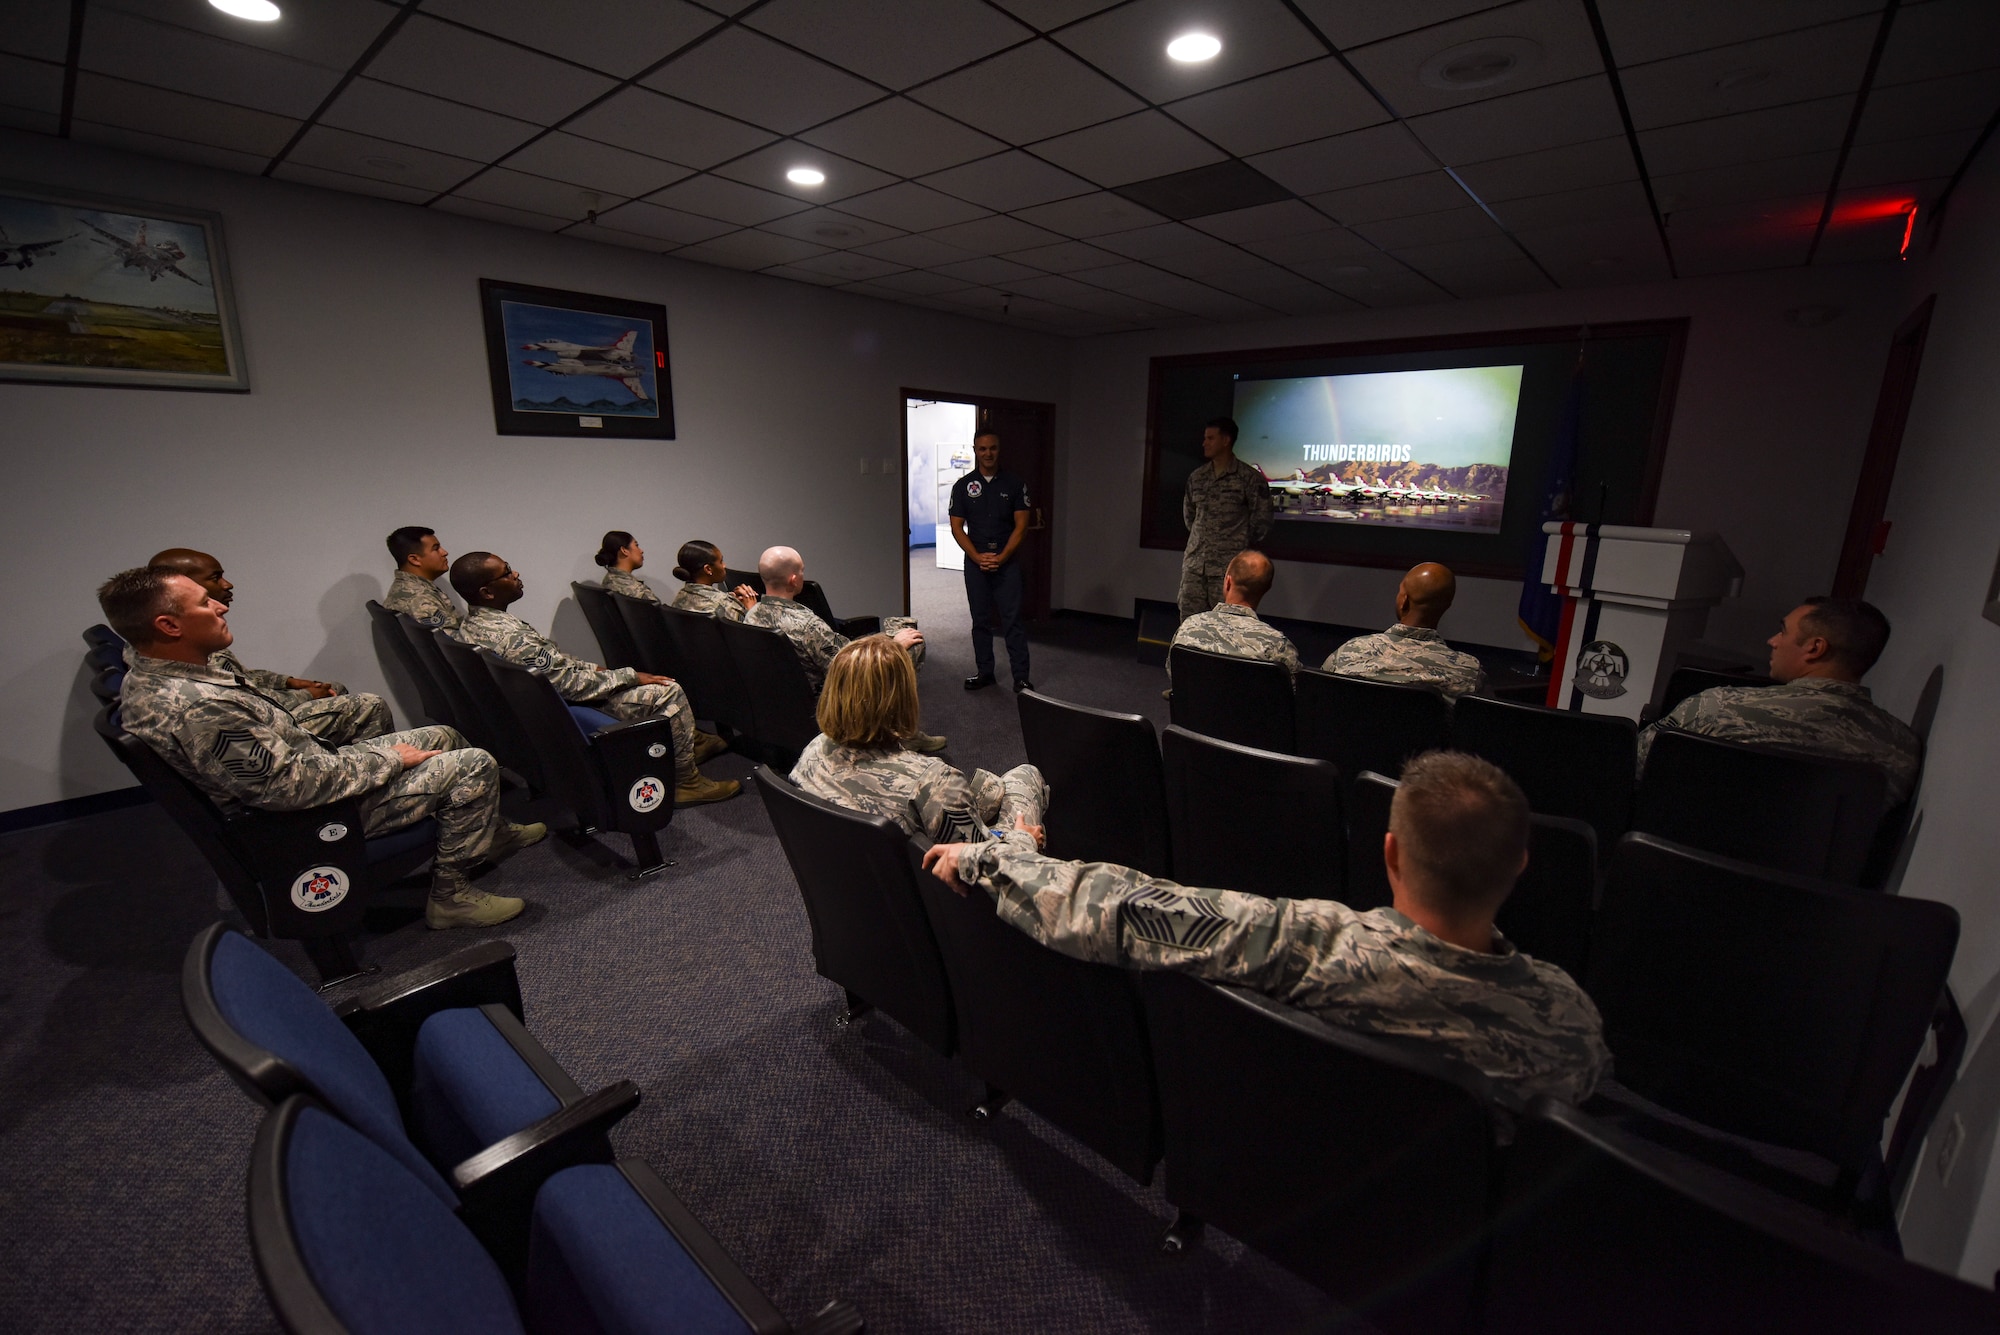 Airmen from units across the U.S. Air Force Warfare Center gather in the Thunderbirds museum at Nellis Air Force Base, Nevada, Aug. 16, 2018. The tour was part of the Warrior Stripe program where technical sergeants toured parts of the base they would not regularly see in their daily job. (U.S. Air Force photo by Airman 1st Class Andrew D. Sarver)